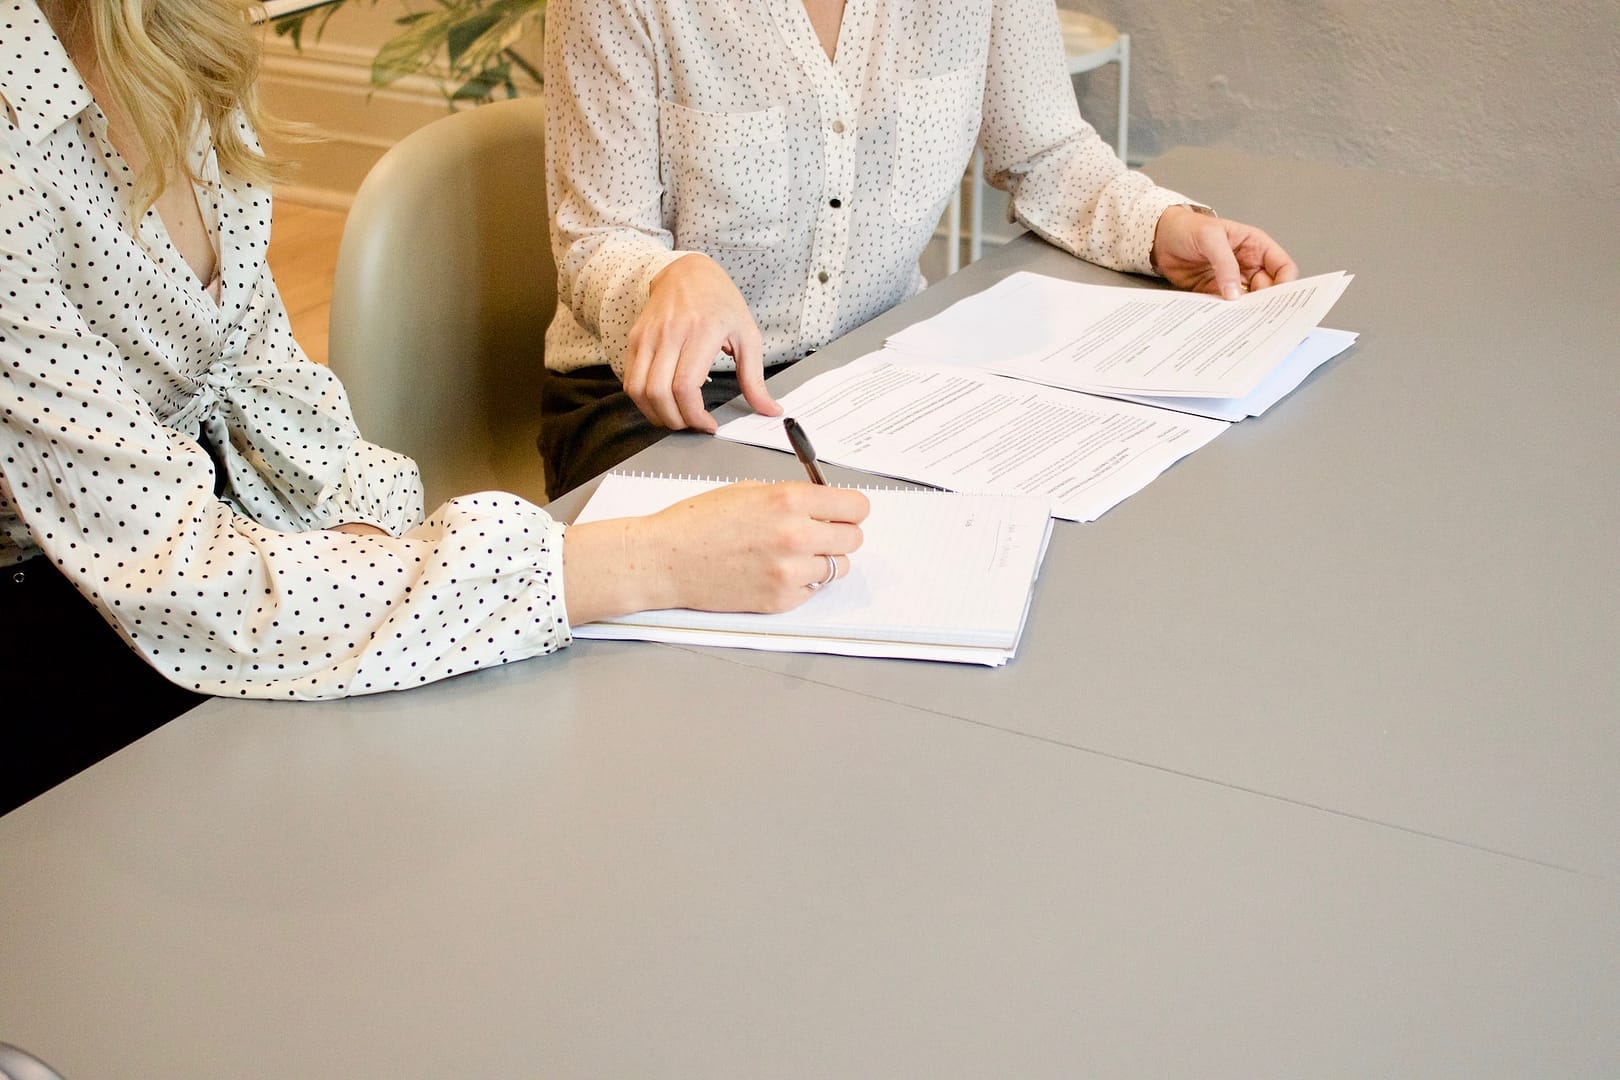 Two people perusing and signing paperwork